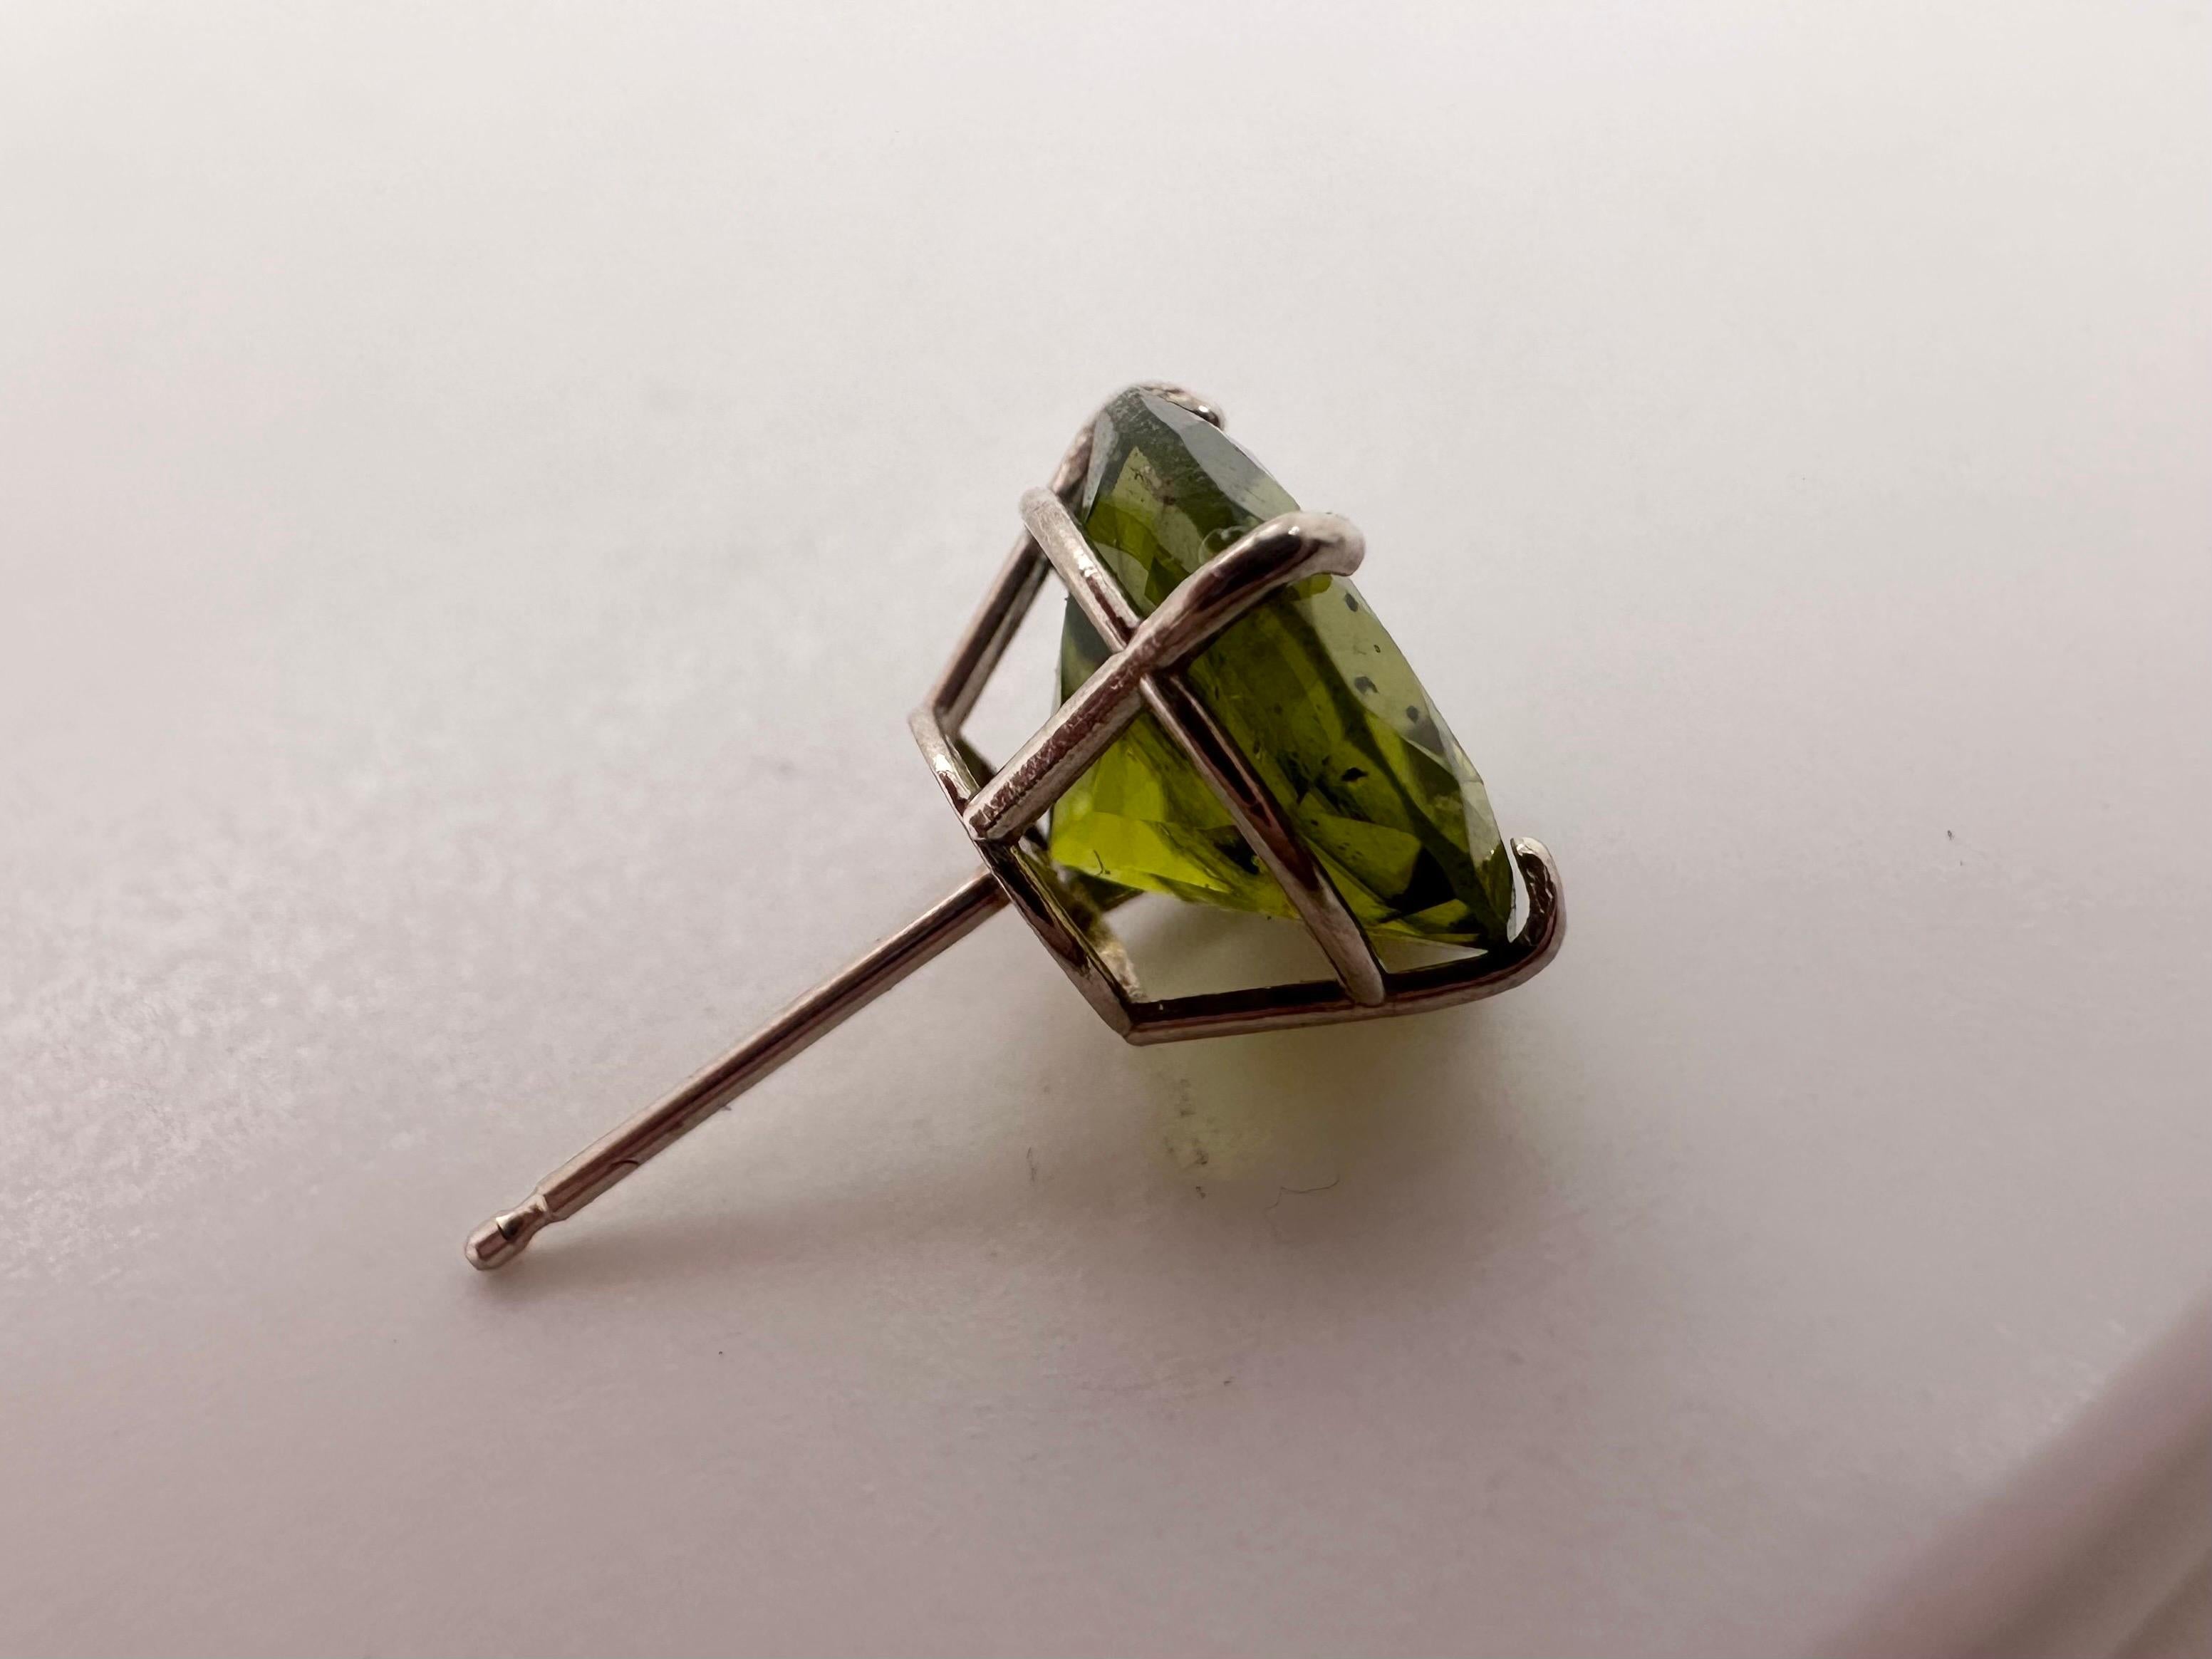 8mm single gold earring 14kt white gold will come with a butterfly and certificate of authenticity. The peridot is 100% natural. EARRING IS SINGLE.

Certificate of authenticity comes with purchase

ABOUT US
We are a family-owned business. Our studio